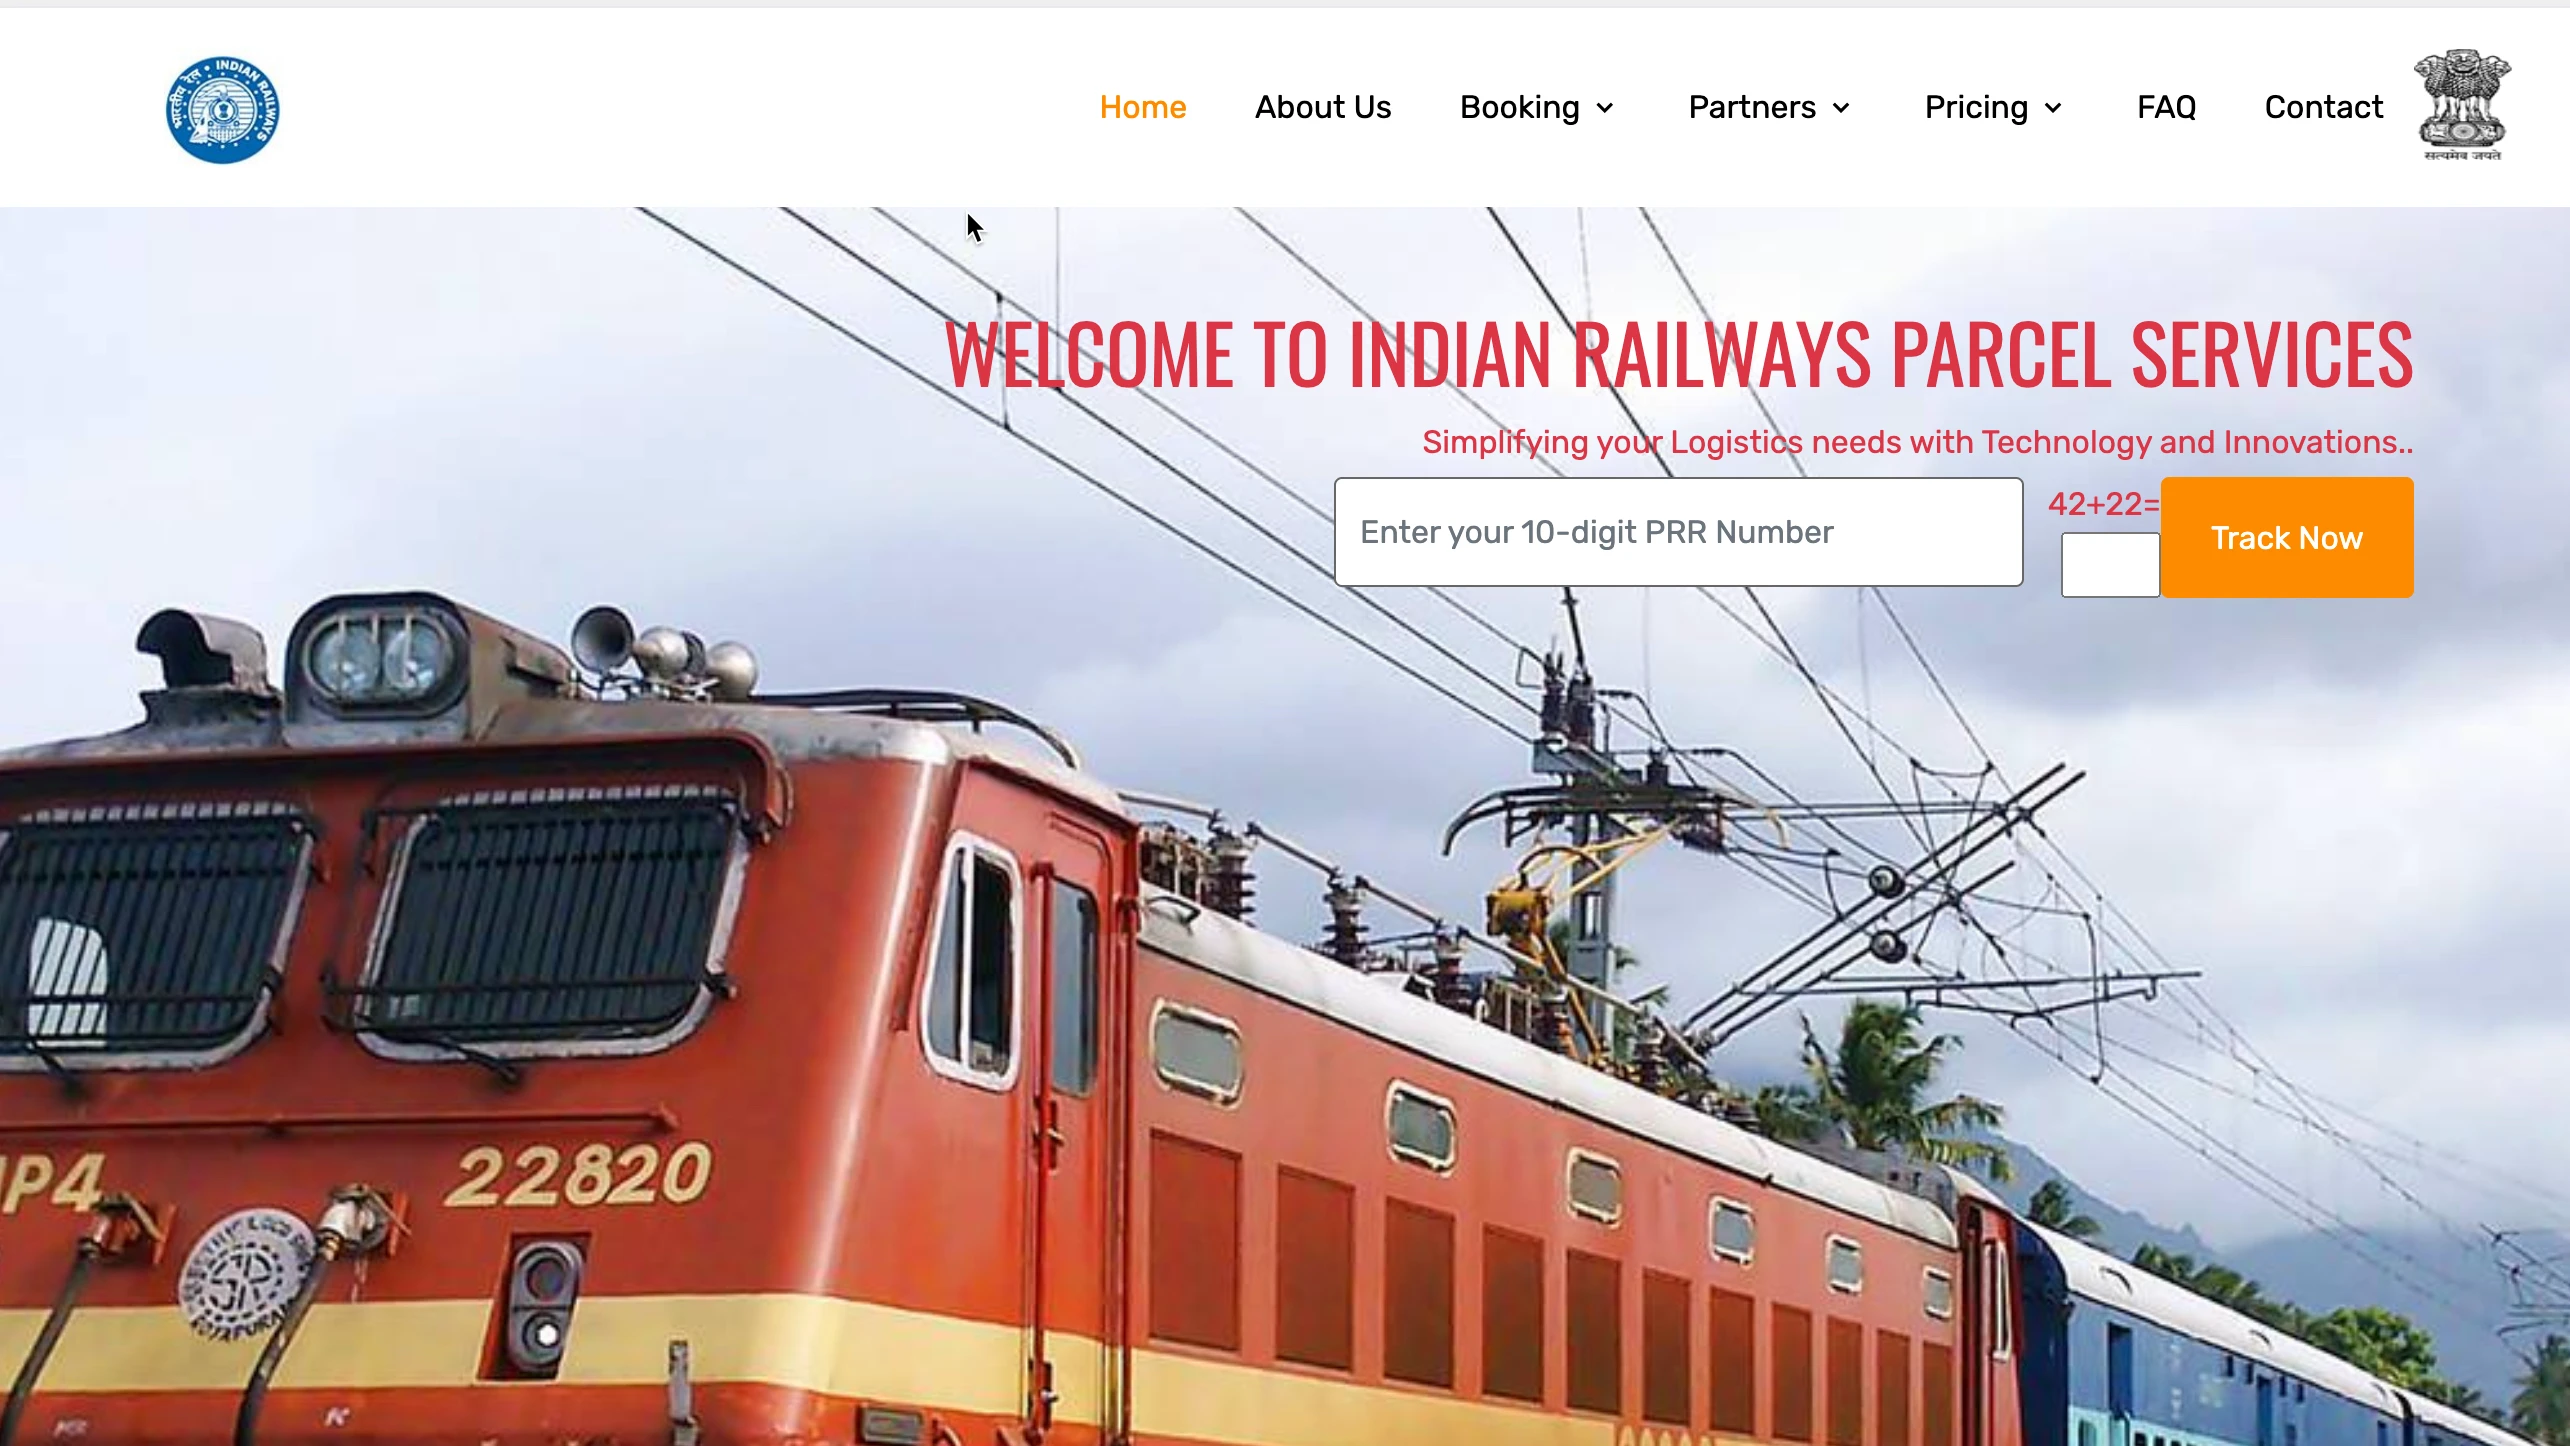 Tracking page of Indian railway parcel with input box to enter PRR number and track now button